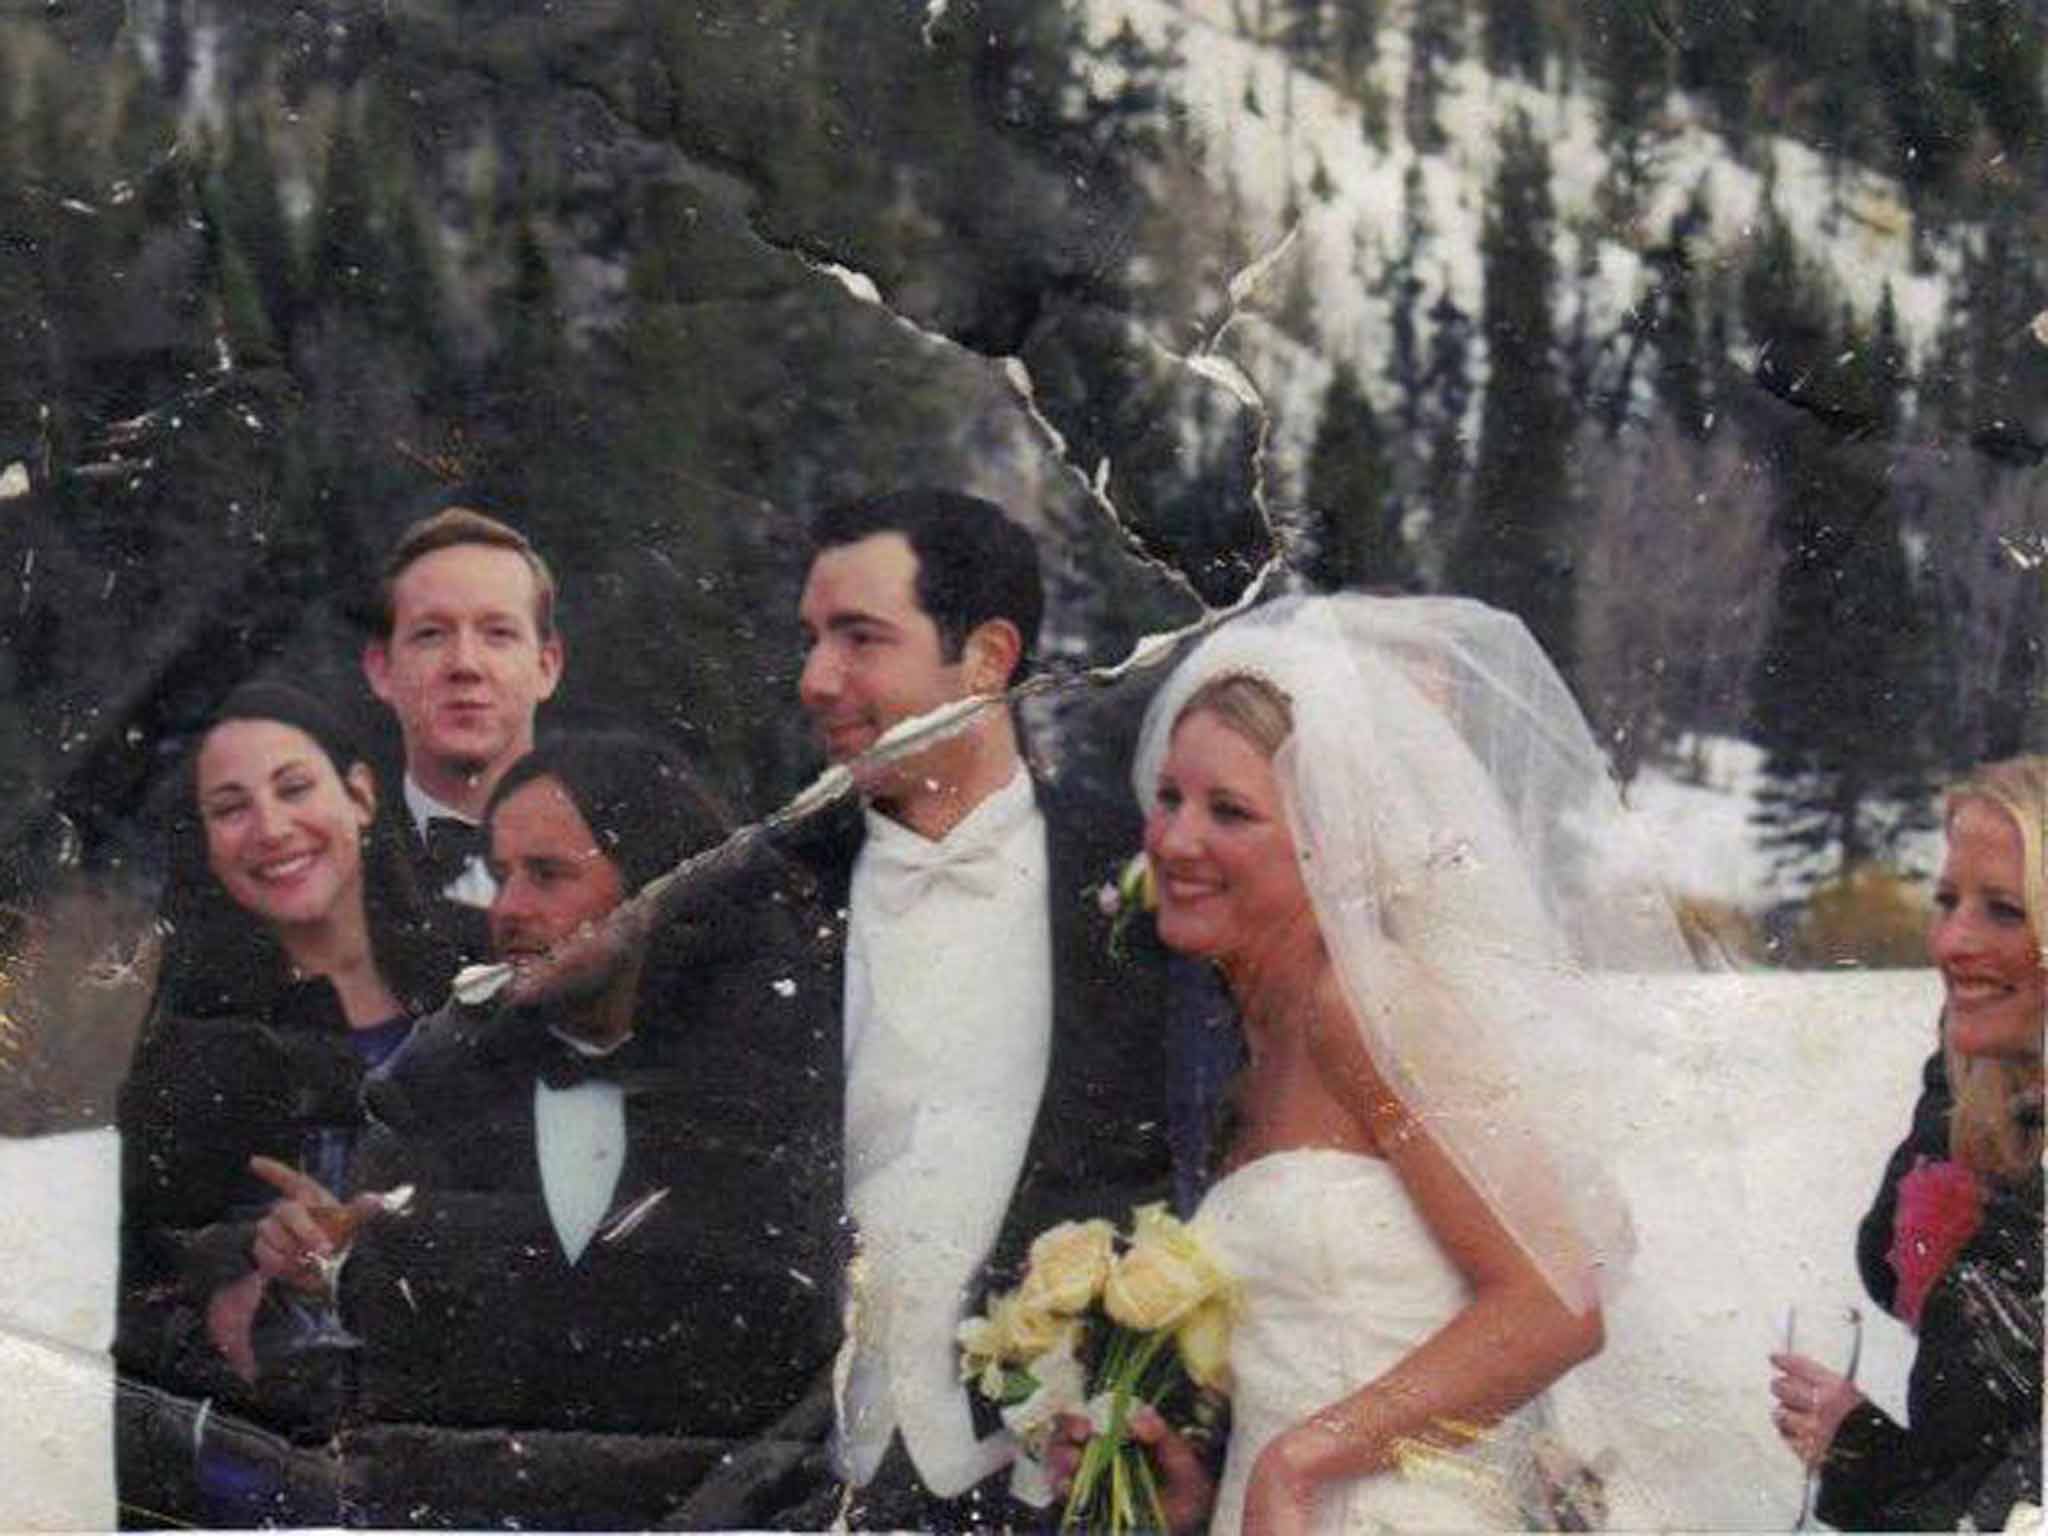 Paper trail: the wedding photograph found in the rubble after 9/11 – it took Elizabeth Keefe 13 years to find the people in it